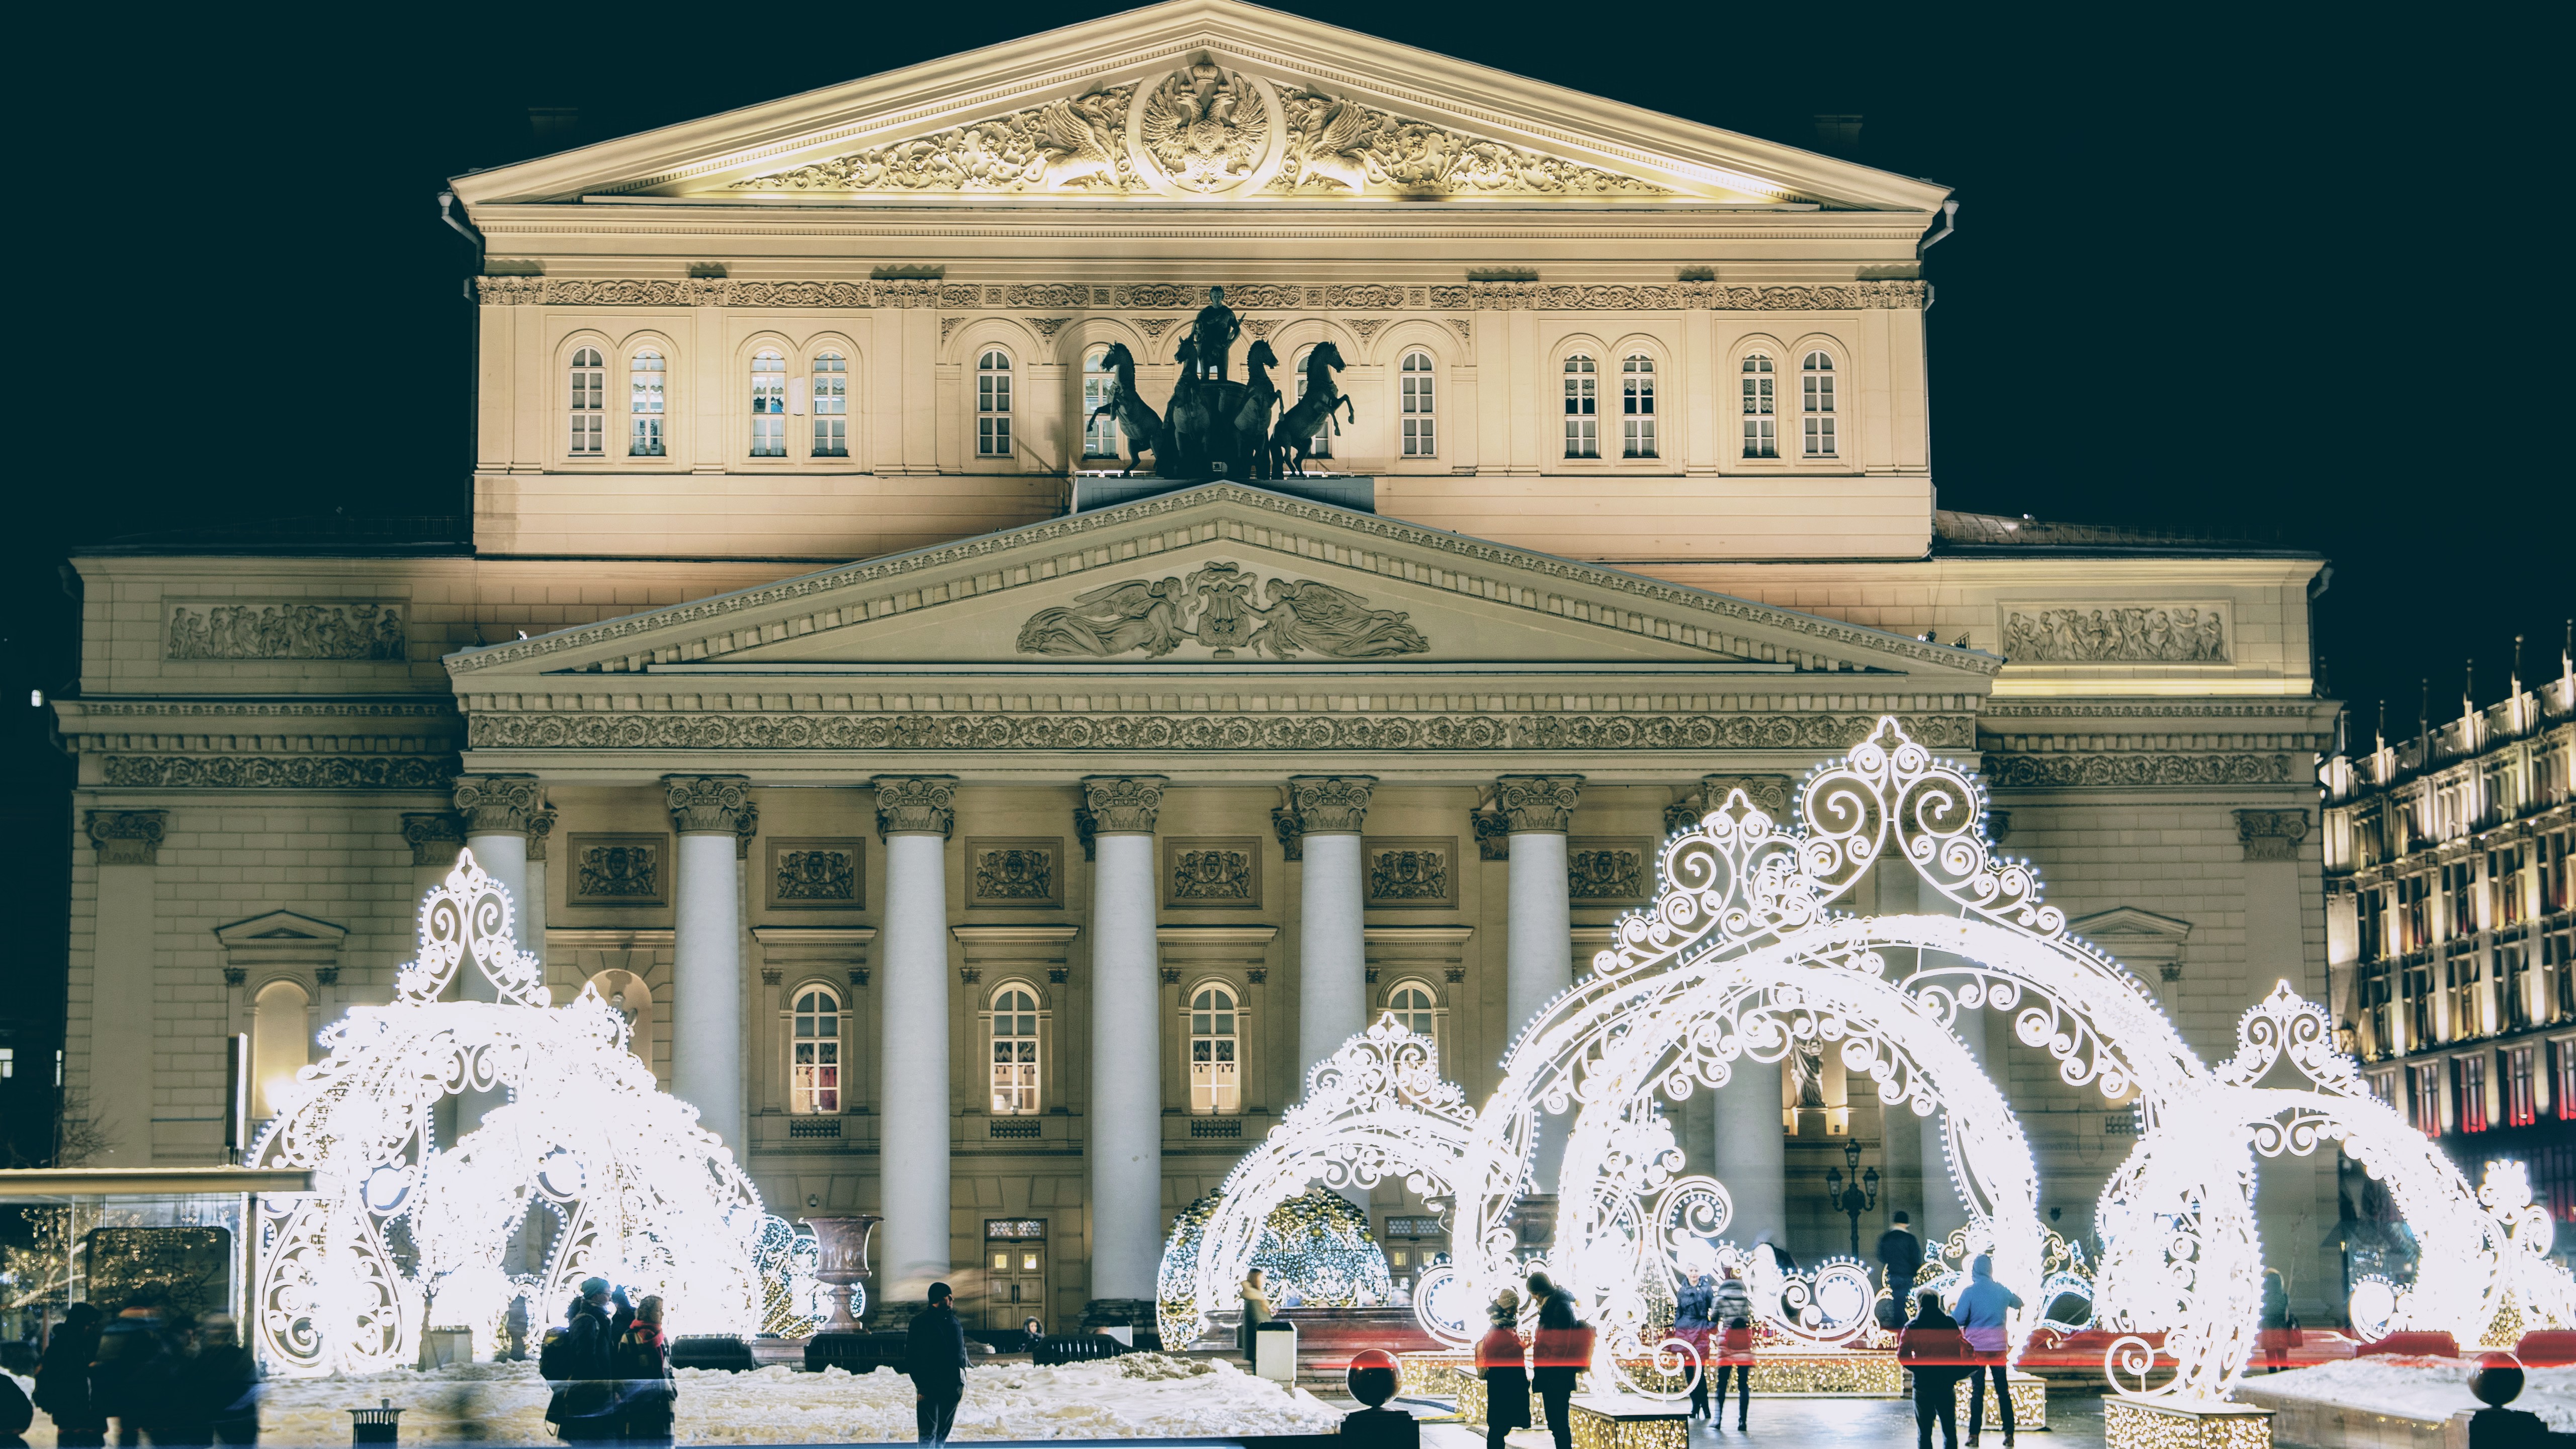 General 5123x2881 architecture Russia Bolshoi Theatre Moscow night city lights winter snow